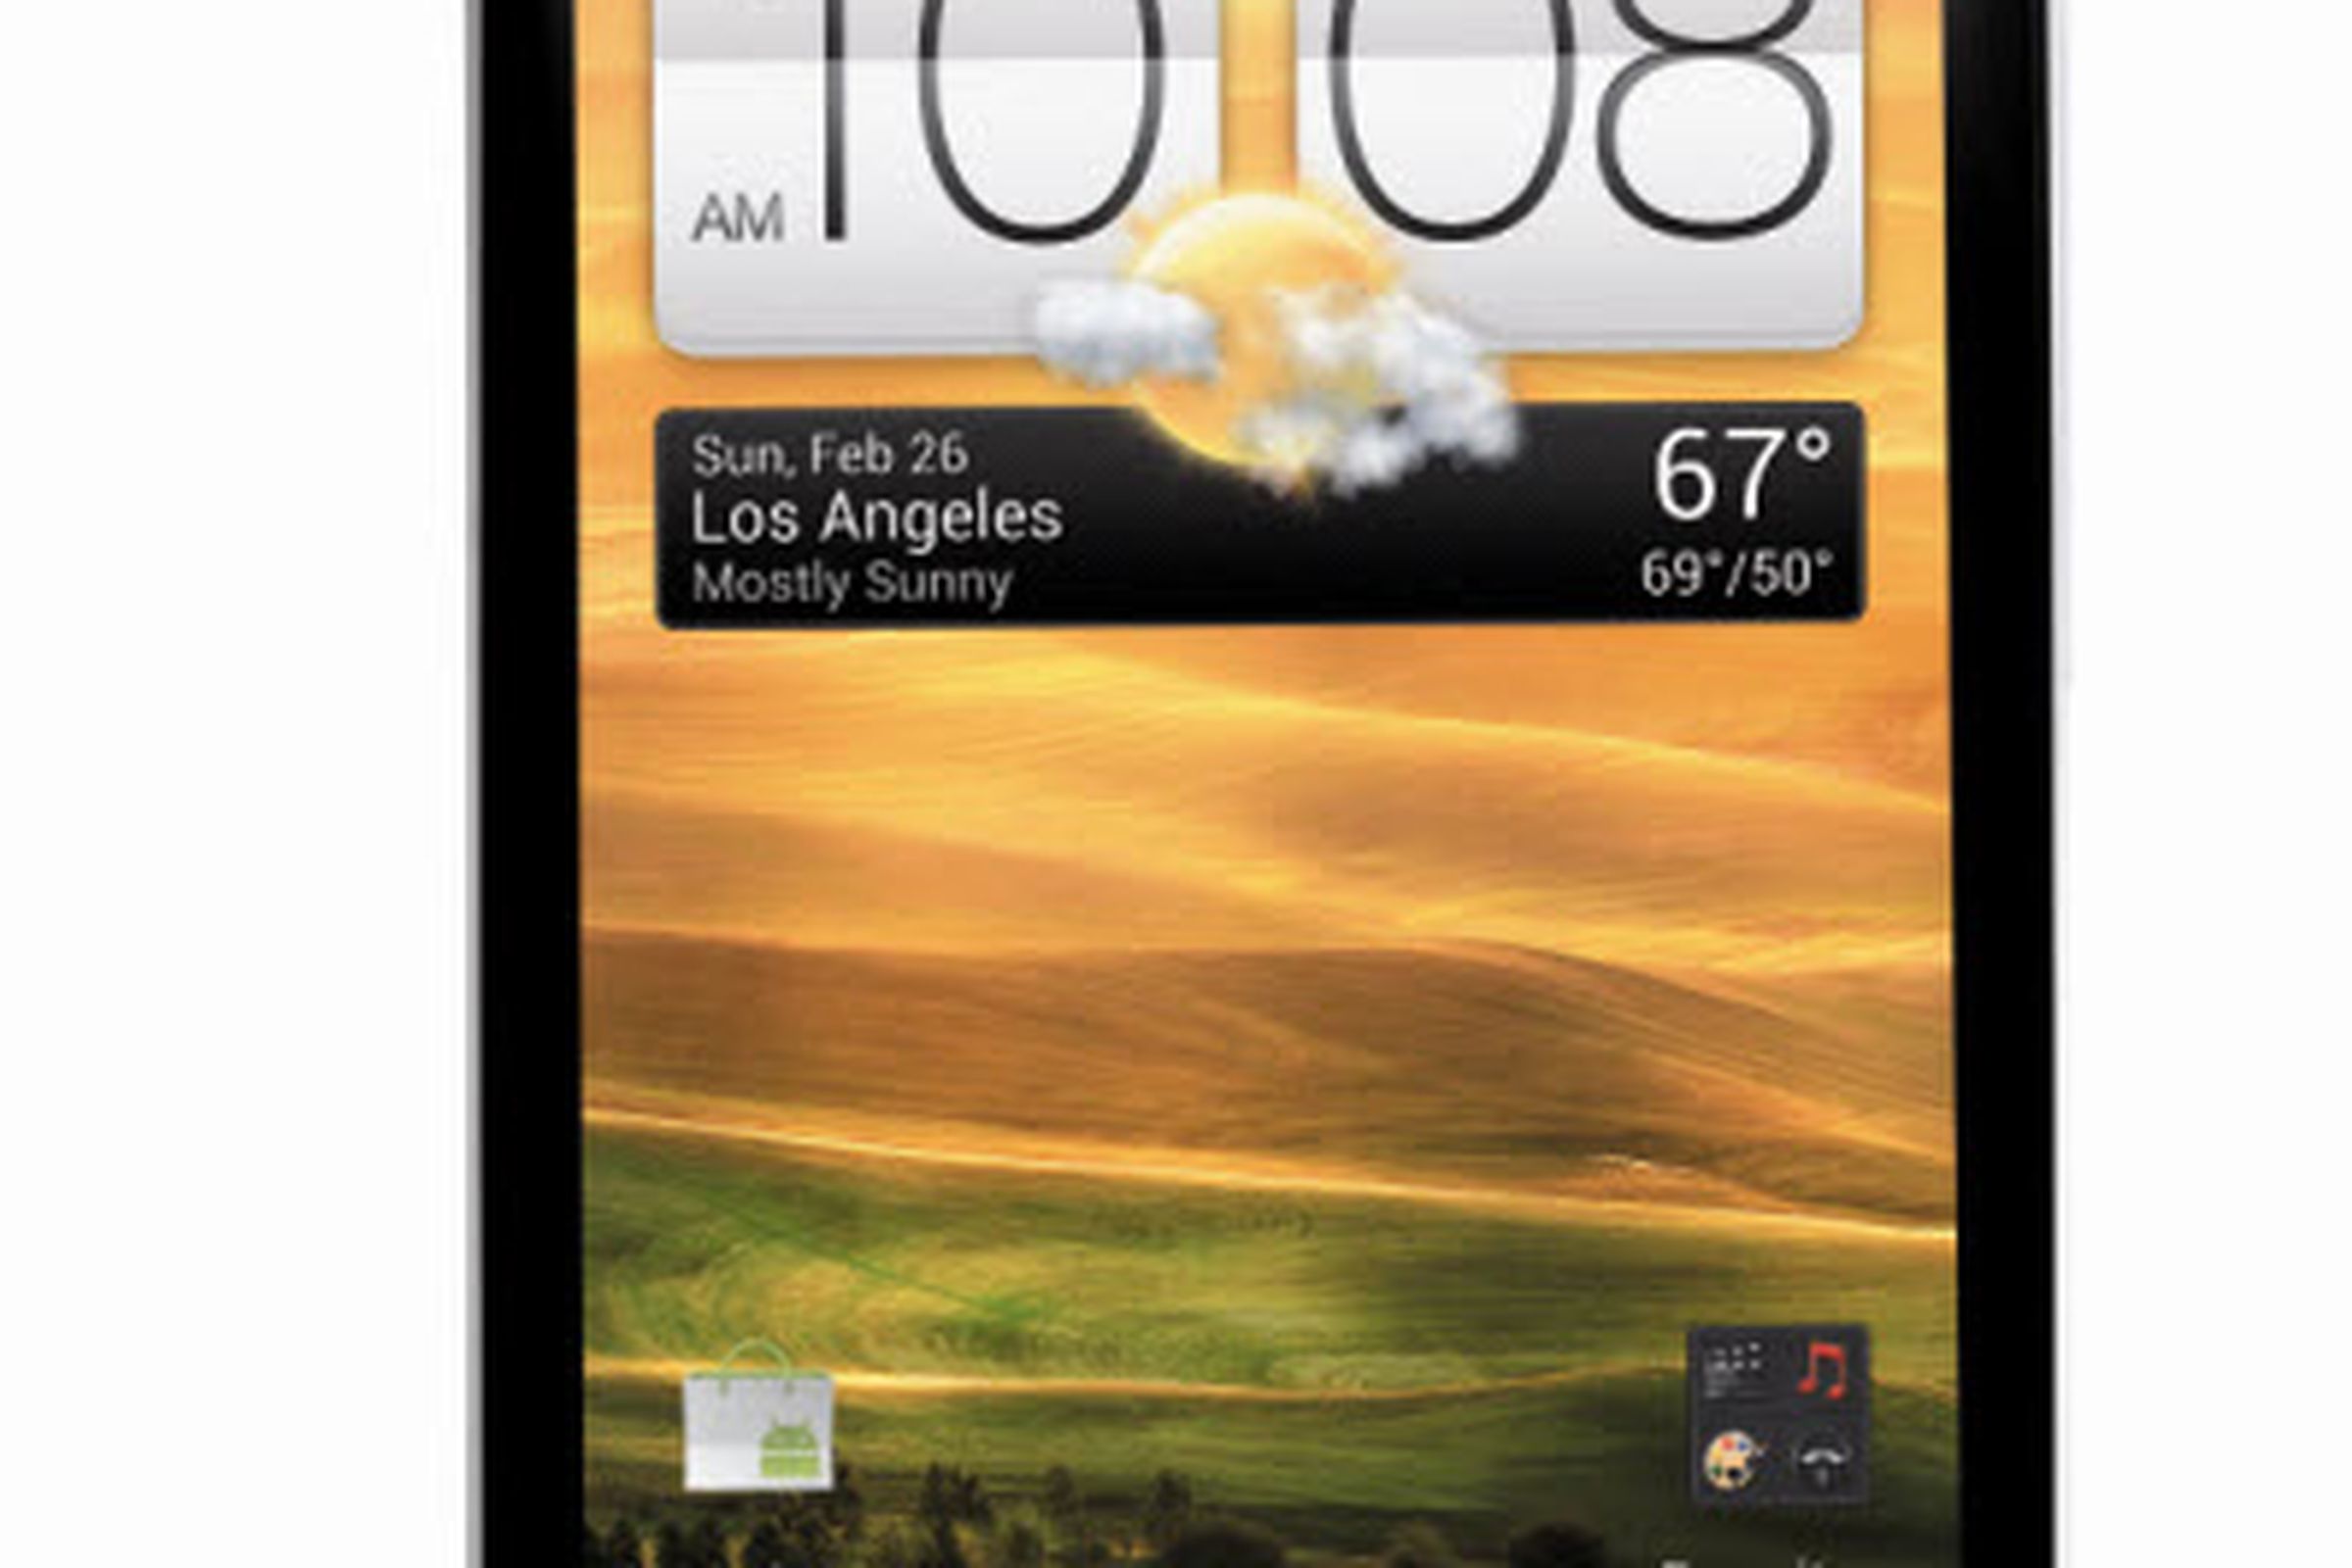 AT&T HTC One X (EMBARGO)